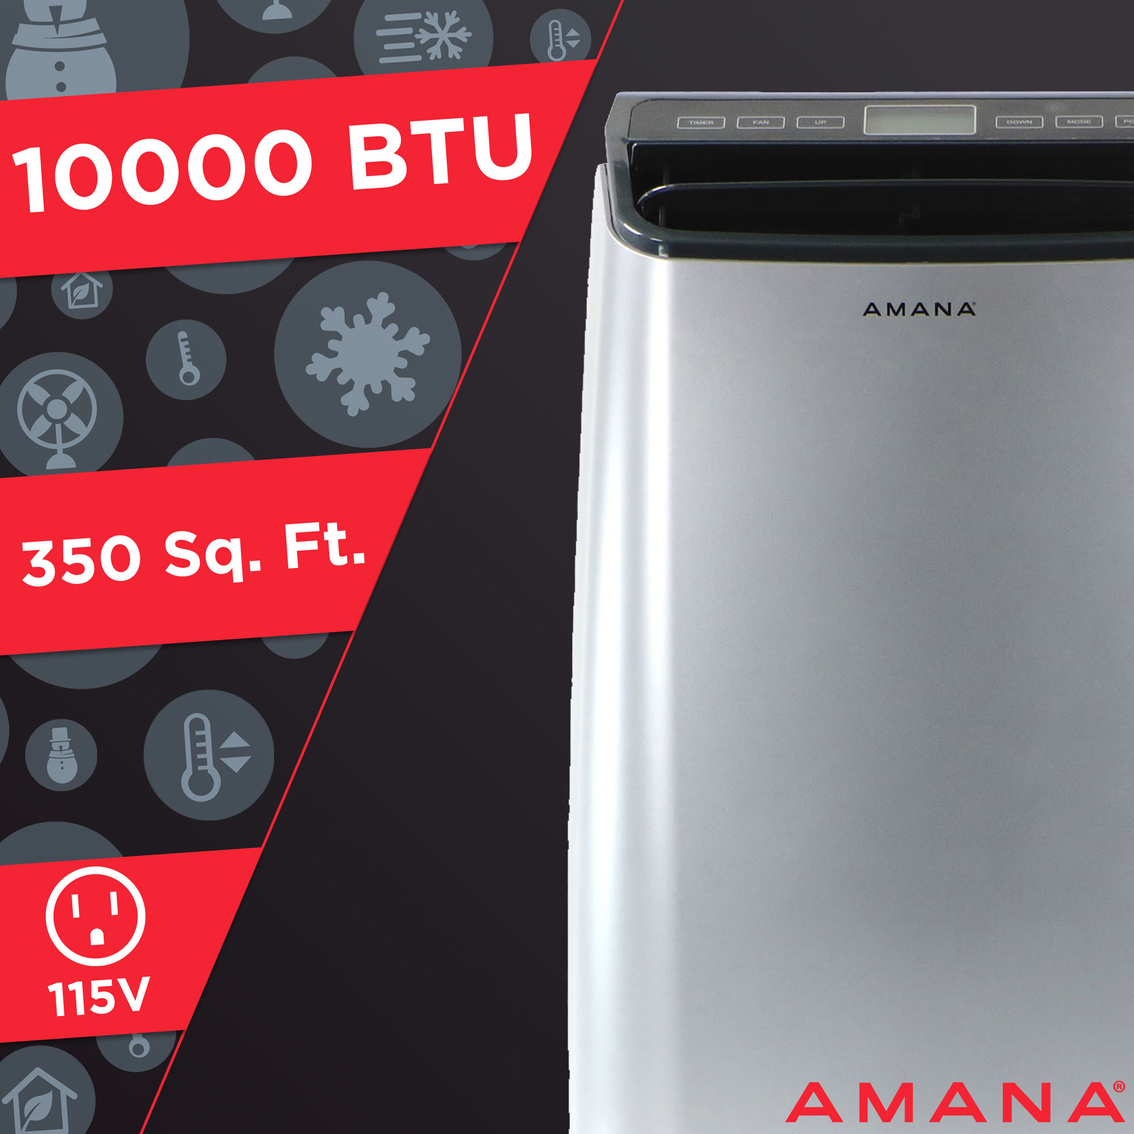 Amana Portable Air Conditioner - Image 2 of 2